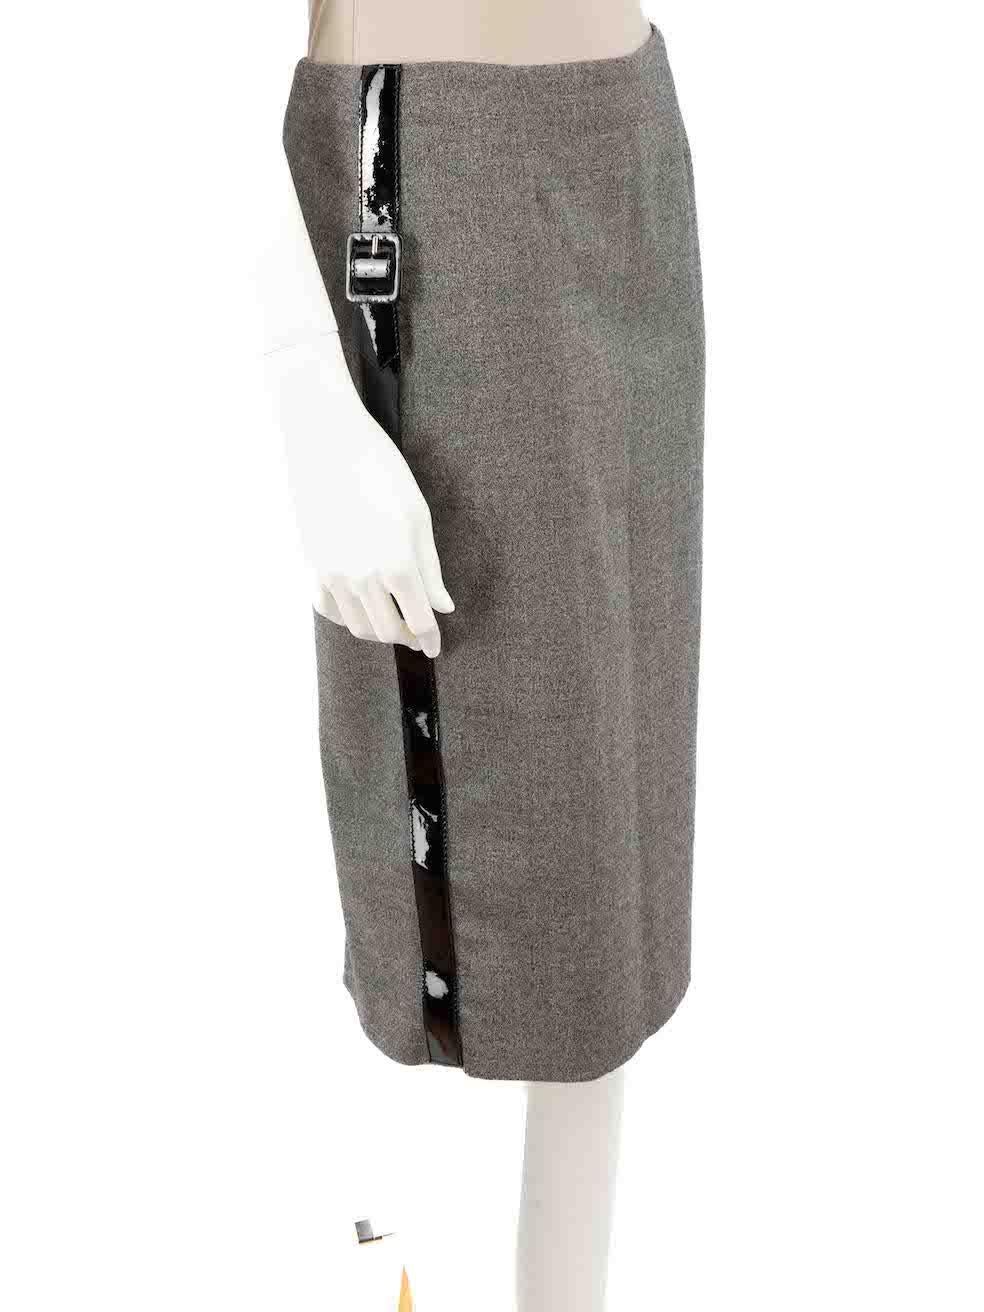 CONDITION is Very good. Minimal wear to skirt is evident. Minimal wear to the rear slit with the fraying and a small tear to the seam at the lining on this used Alexander McQueen designer resale item.
 
 Details
 Grey
 Wool
 Straight skirt
 Back zip